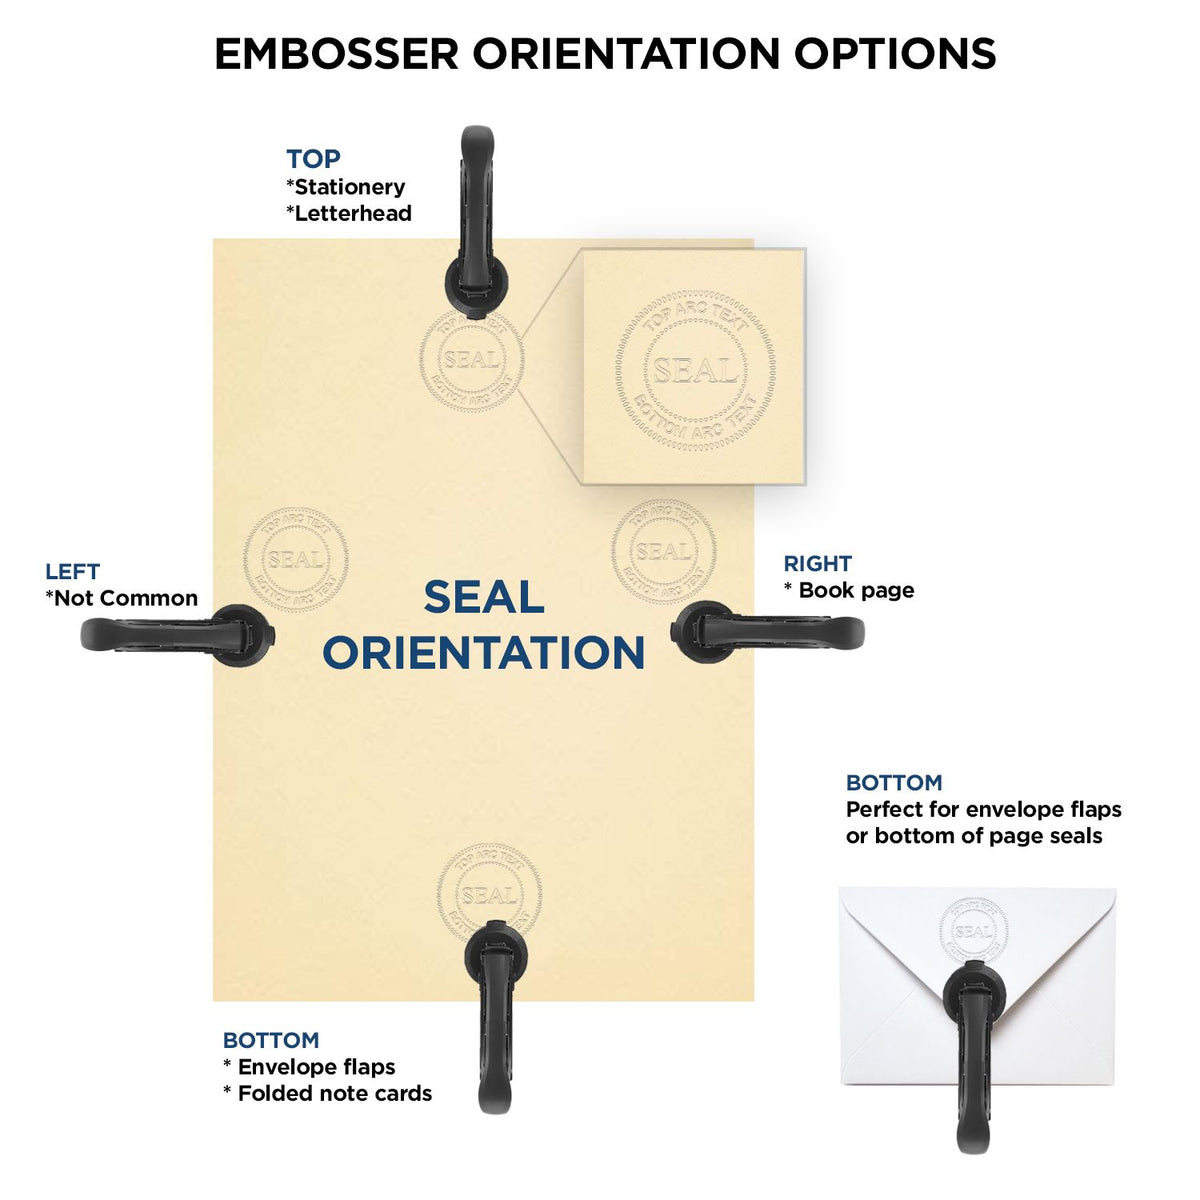 An infographic for the State of Delaware Architectural Seal Embosser showing embosser orientation, this is showing examples of a top, bottom, right and left insert.